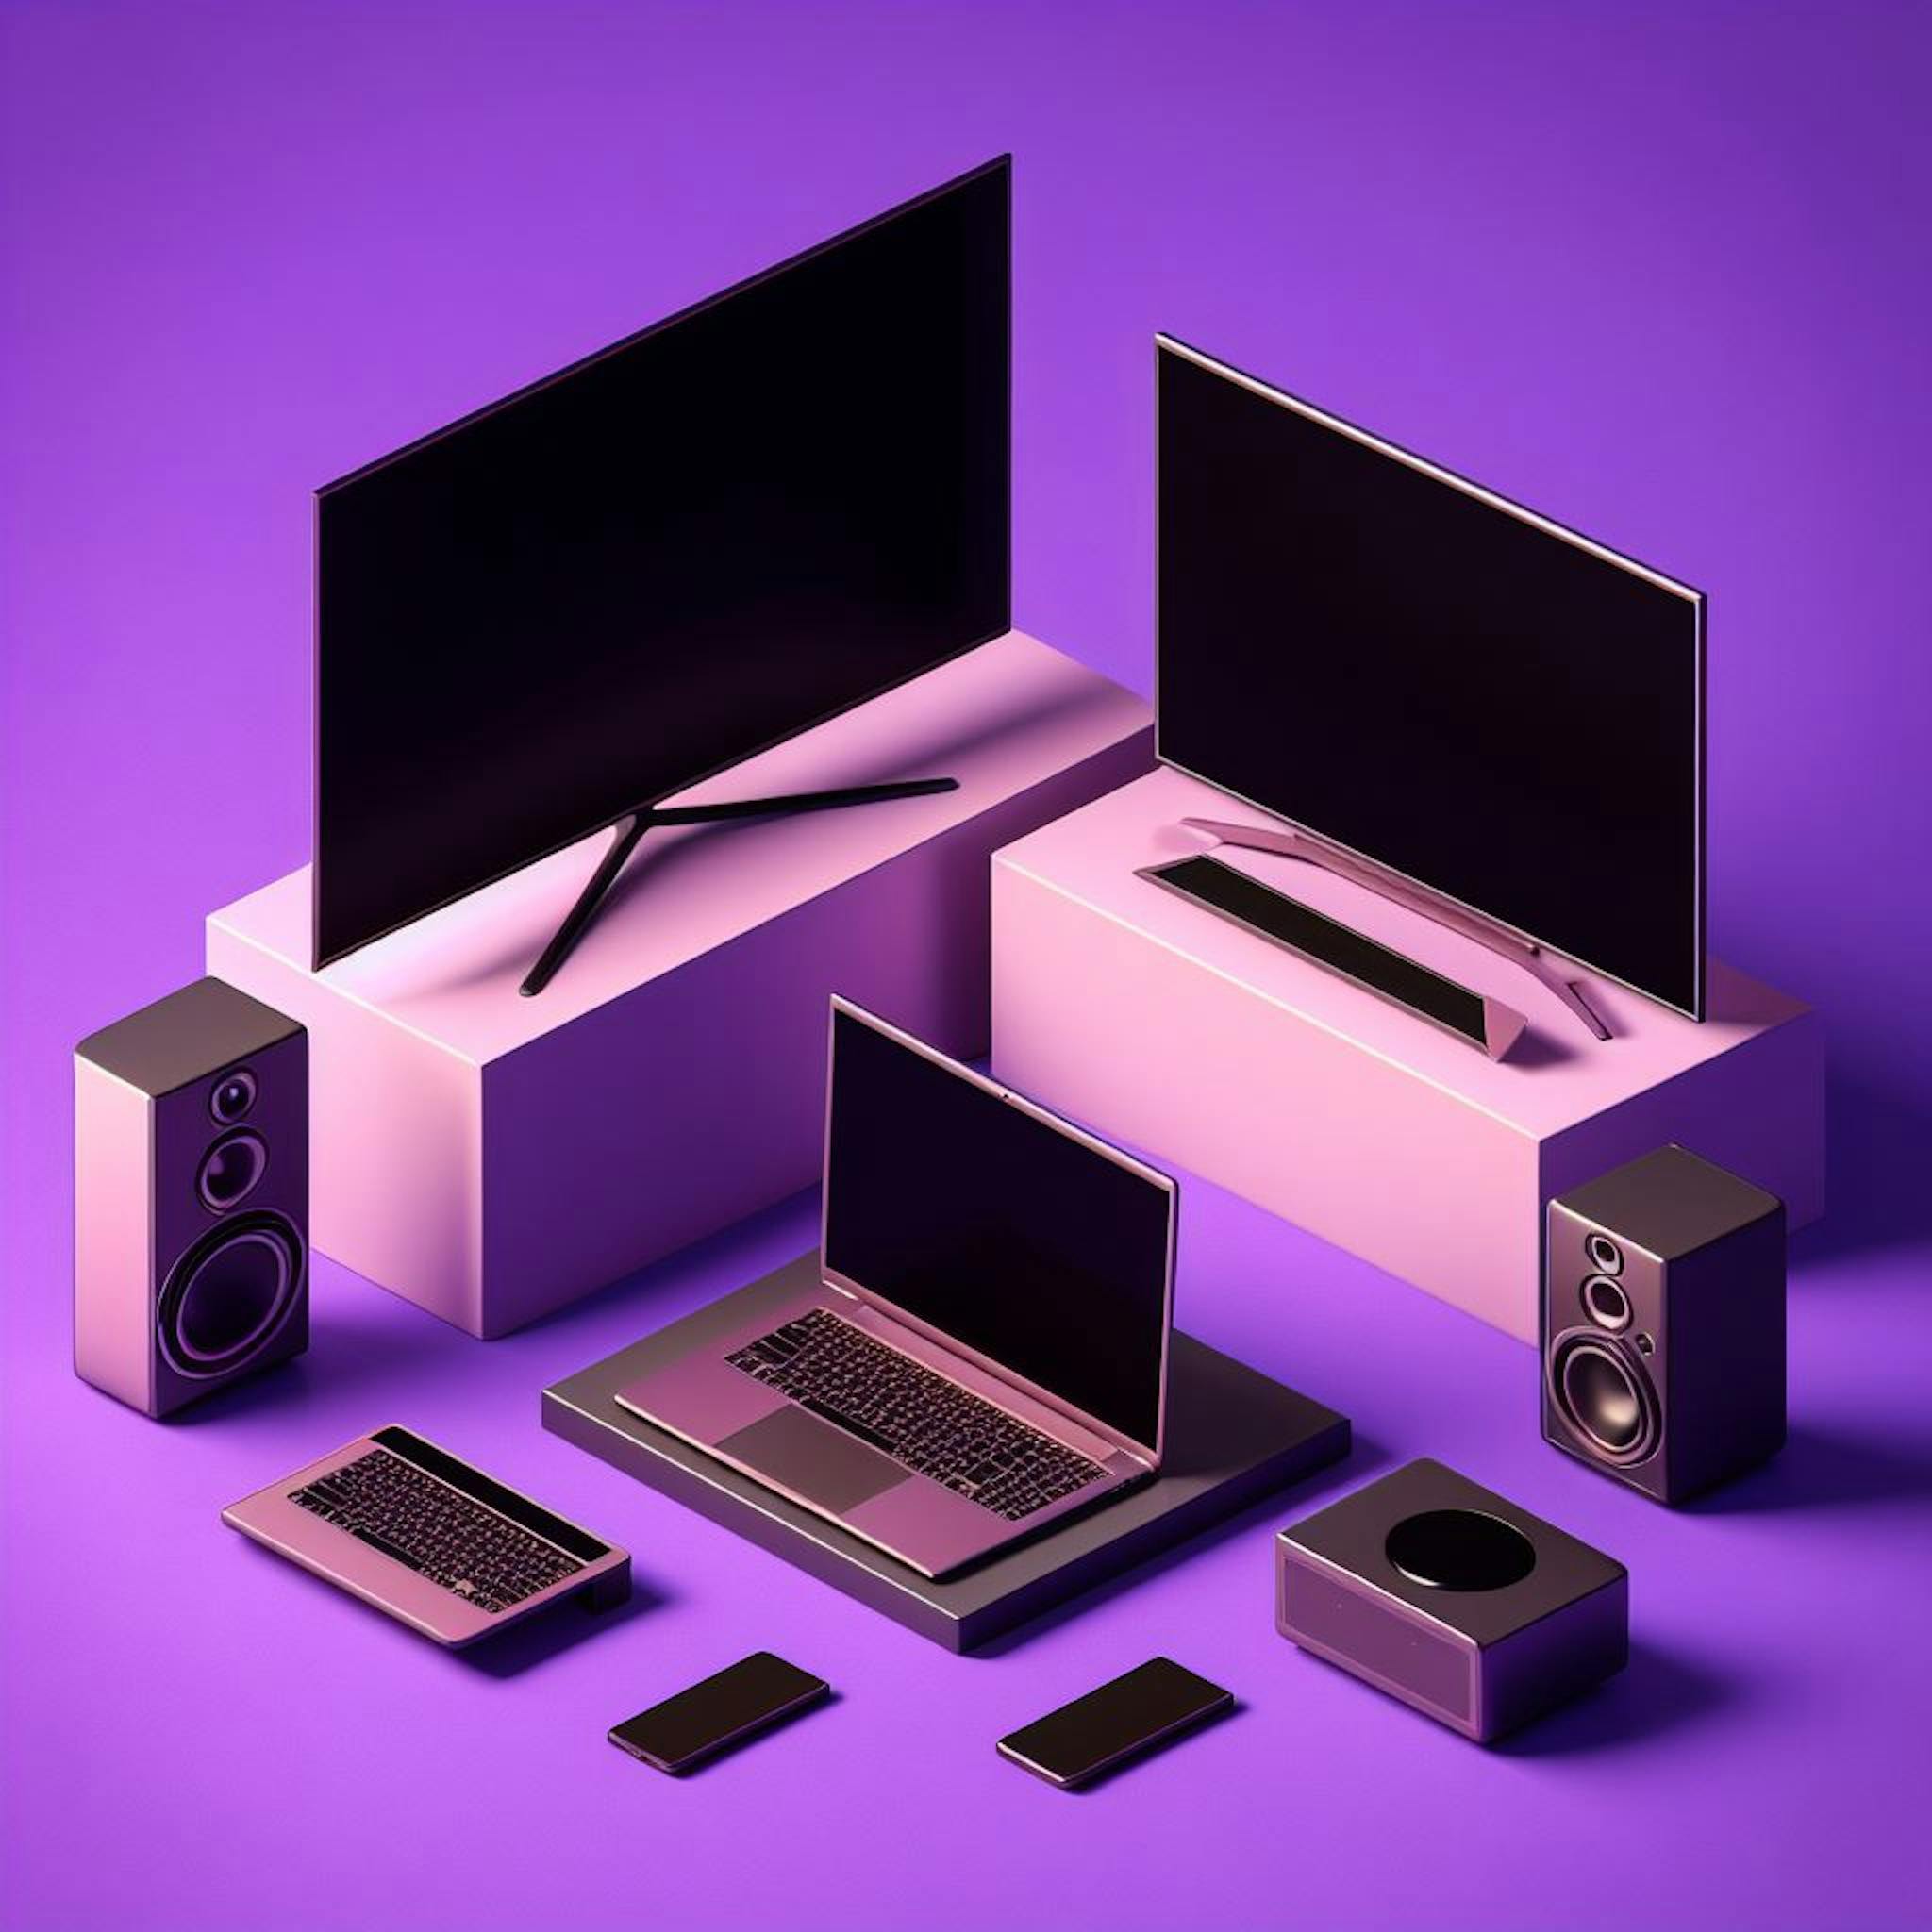 TVs and laptops on sets to show off on a purple background. 